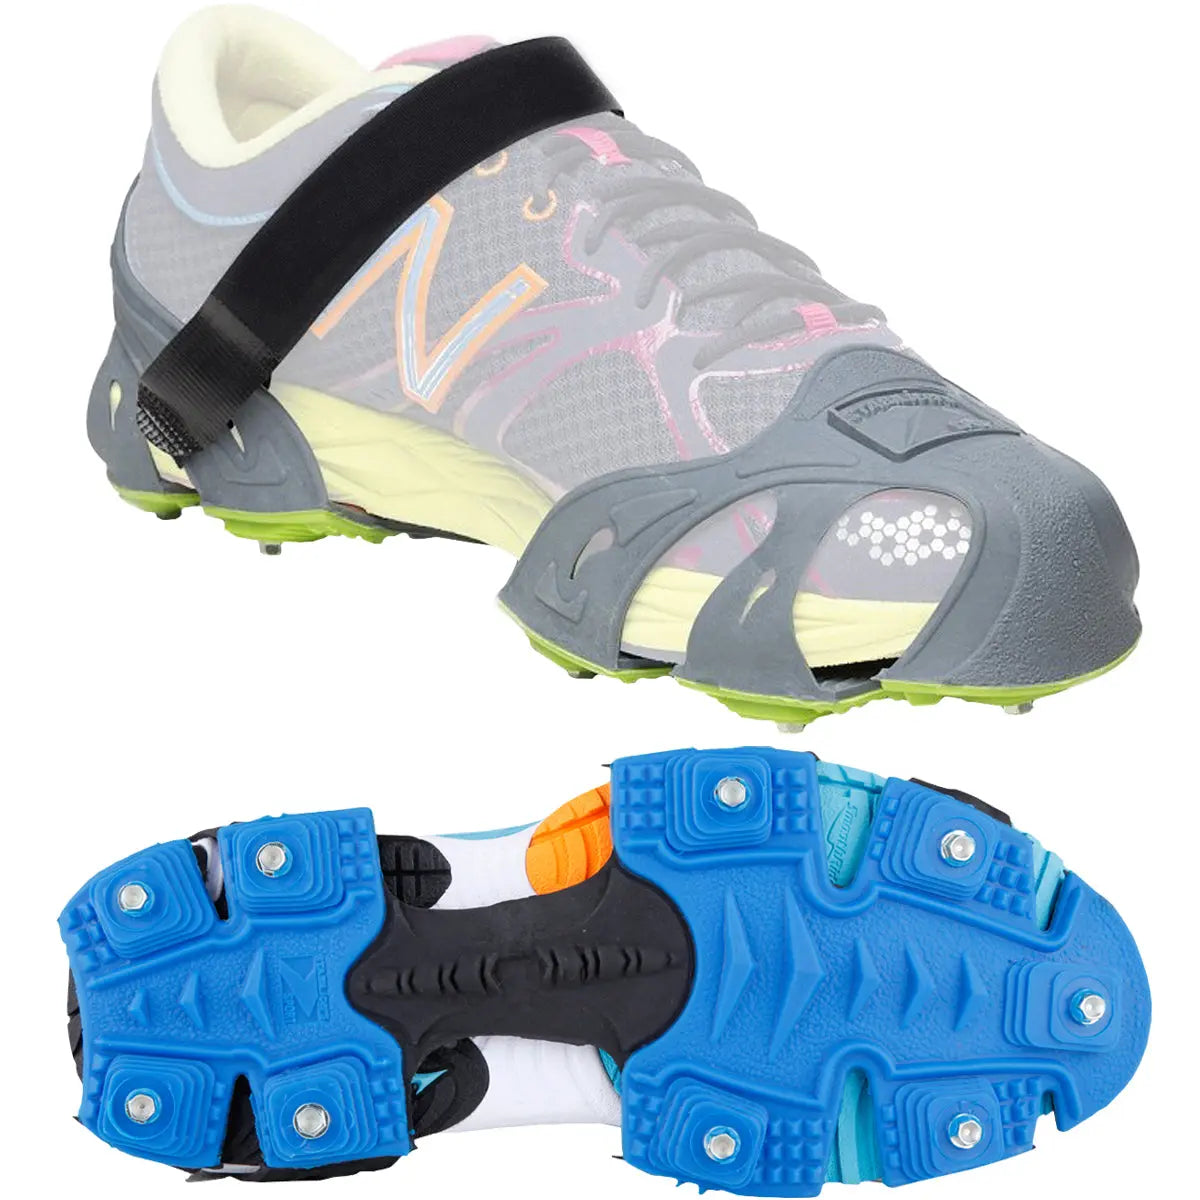 STABILicers Run Lightweight Steel Removable Snow and Ice Traction Running Cleats STABIL